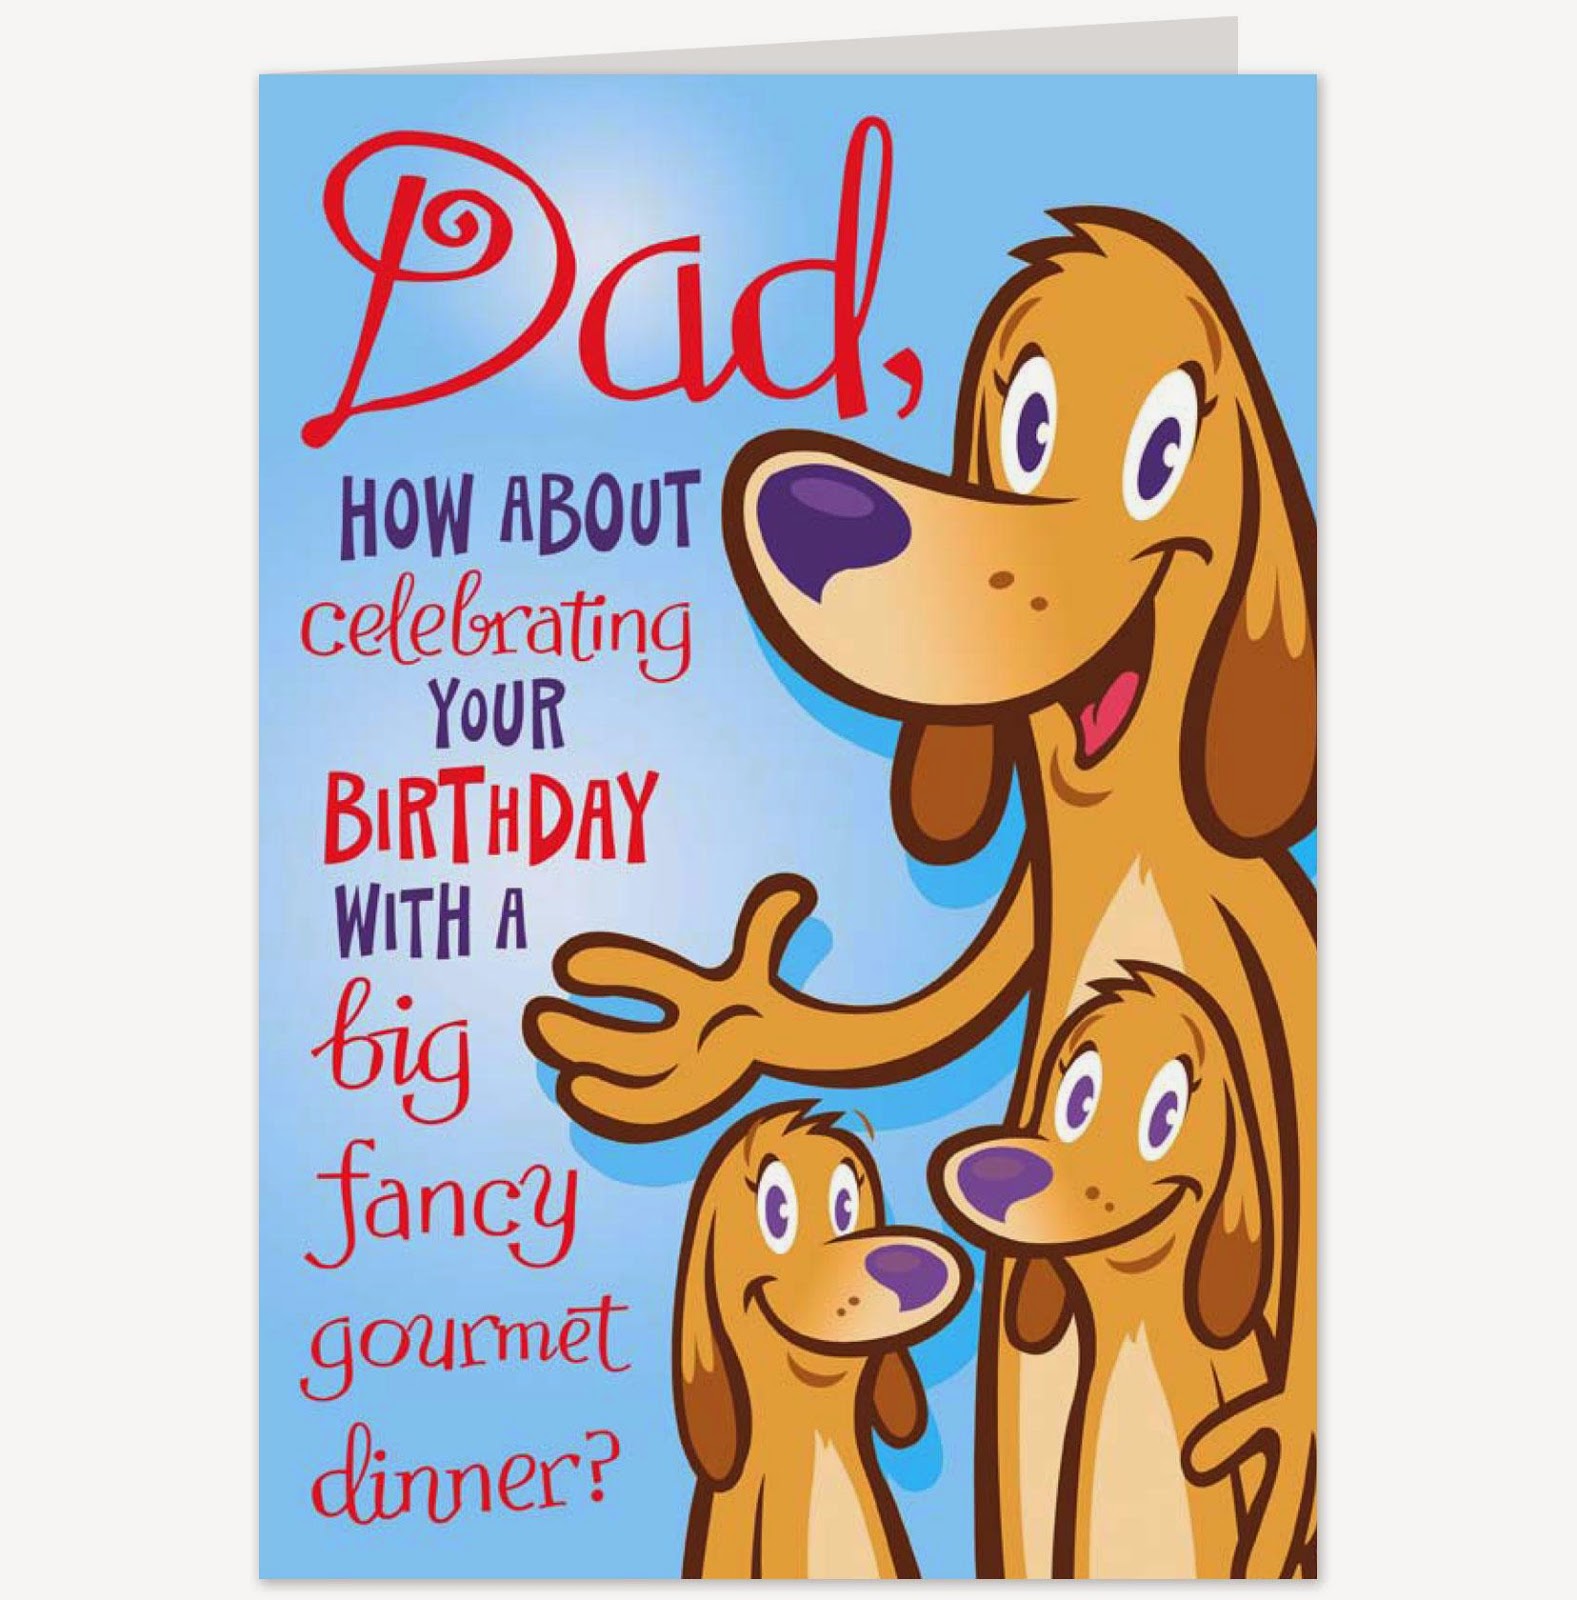 Free Printable Birthday Cards For Dad